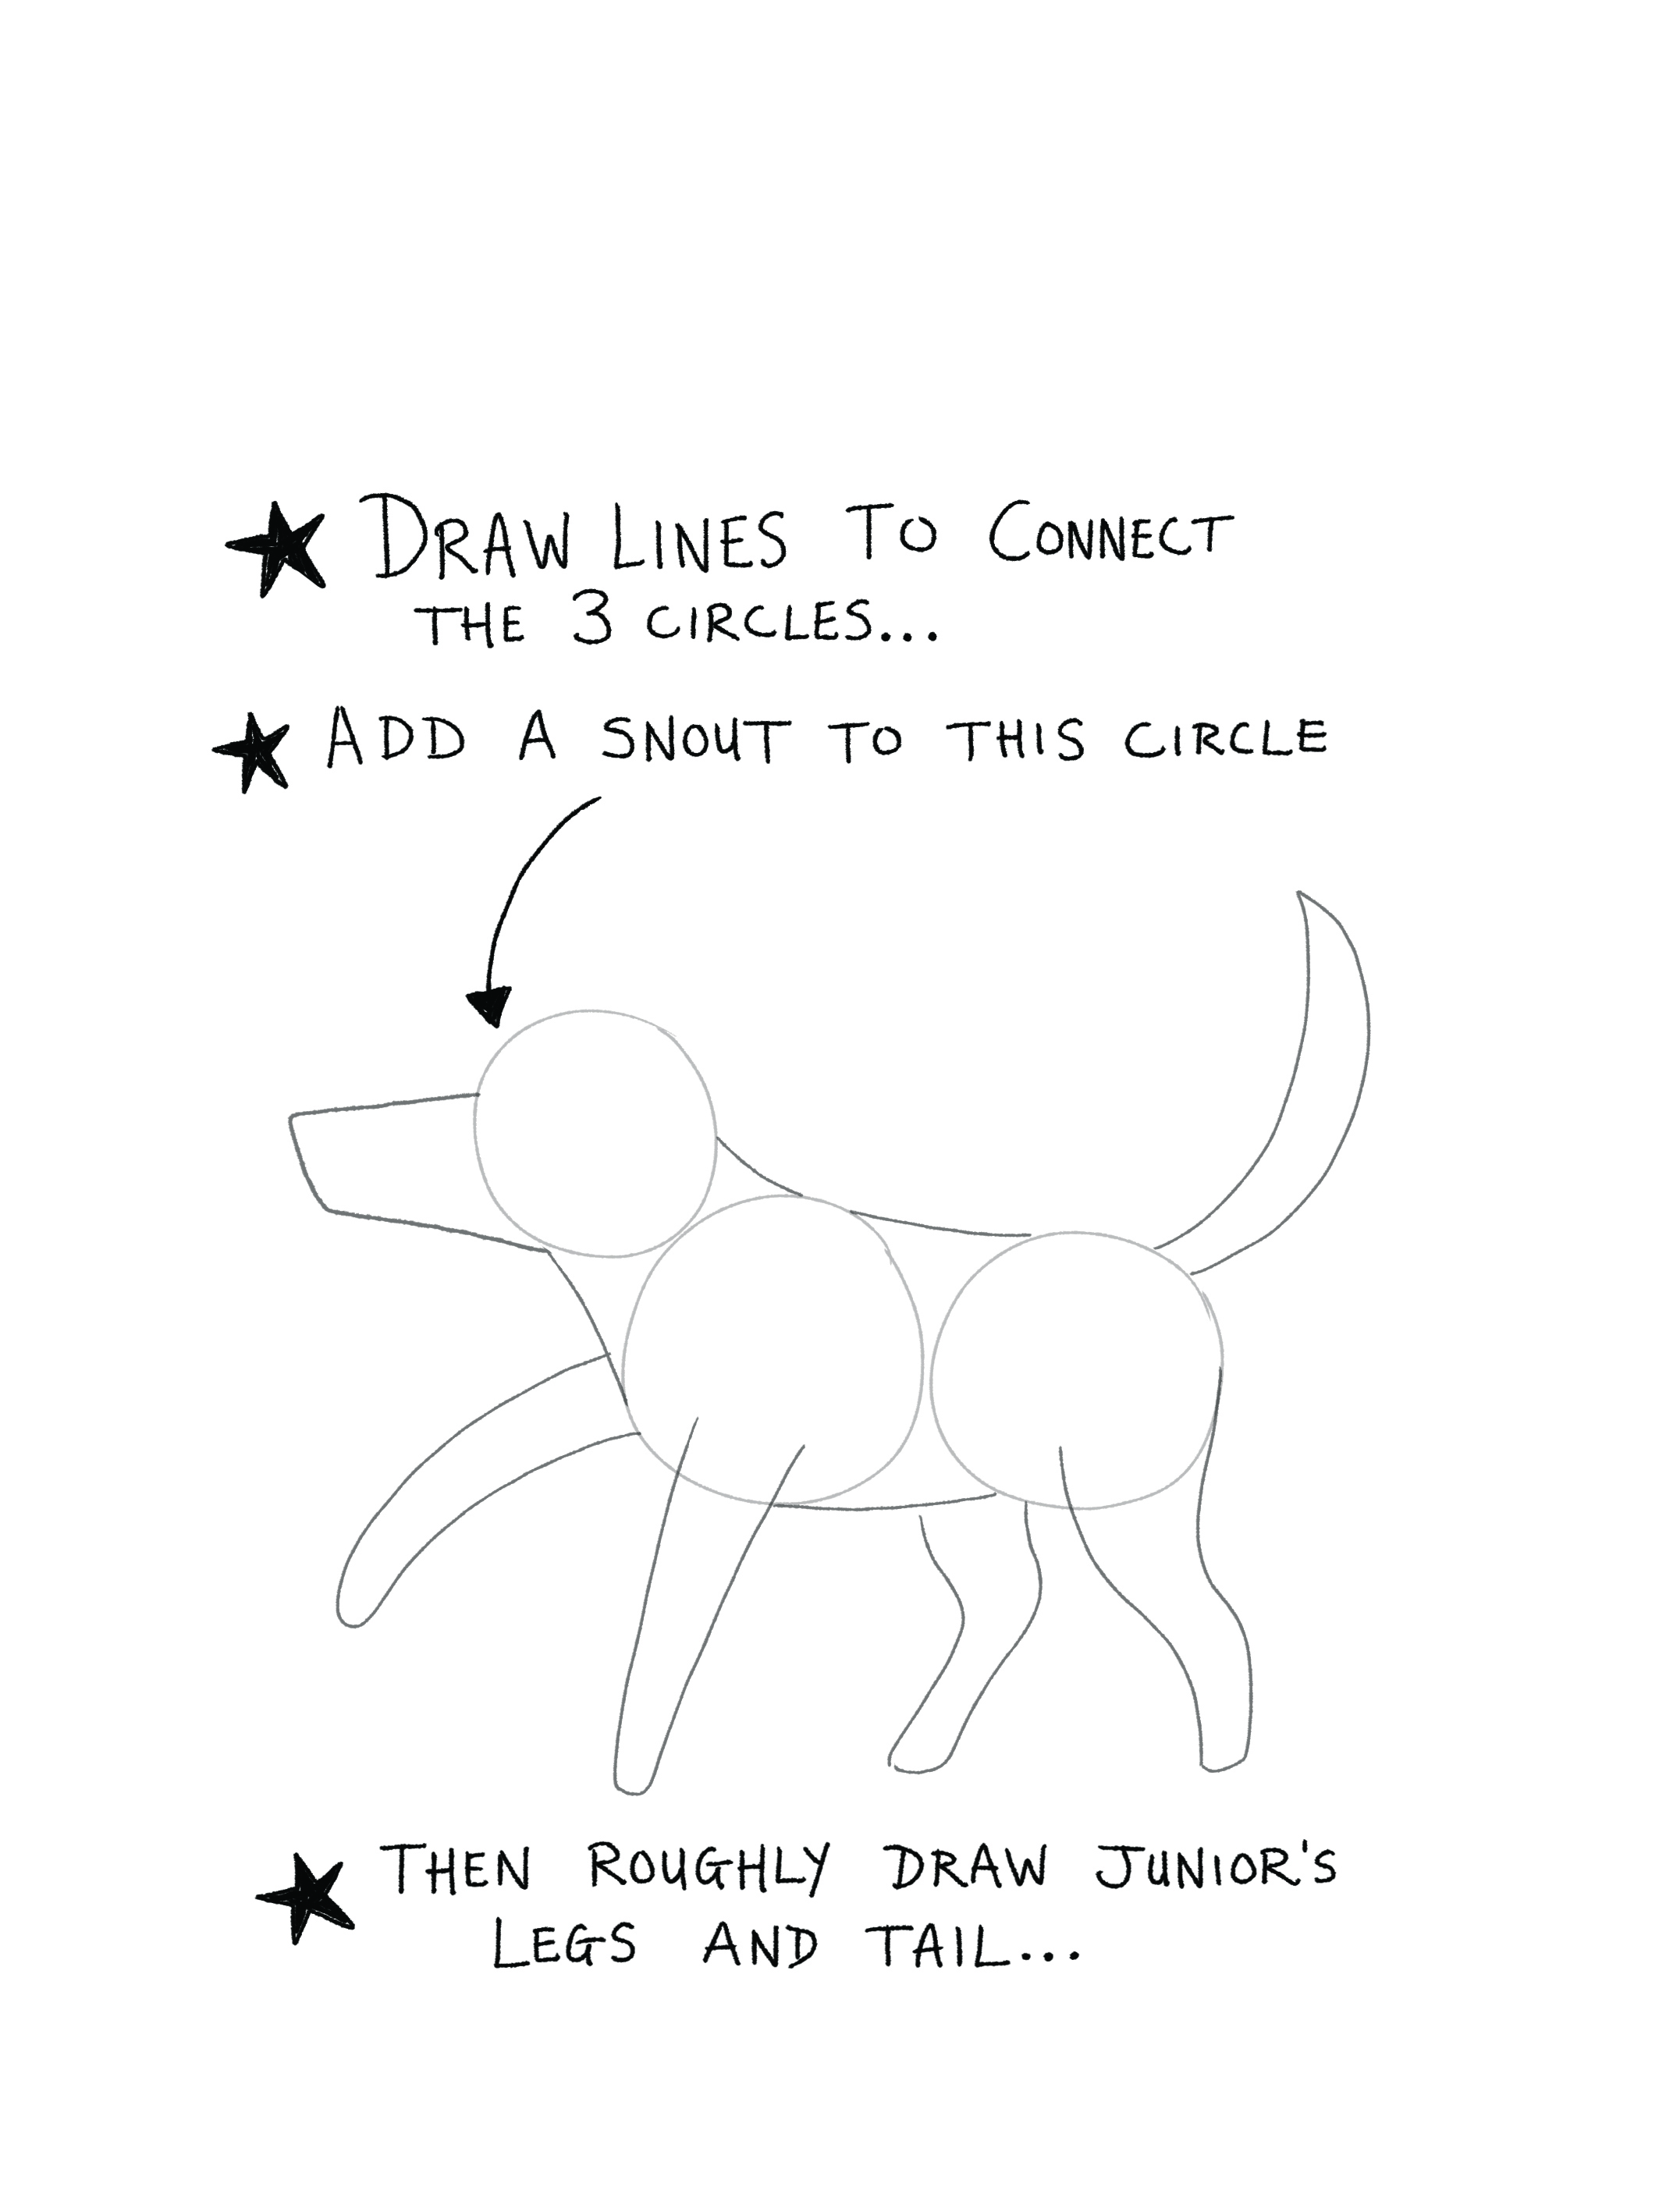 How to draw a dog in 5 easy steps